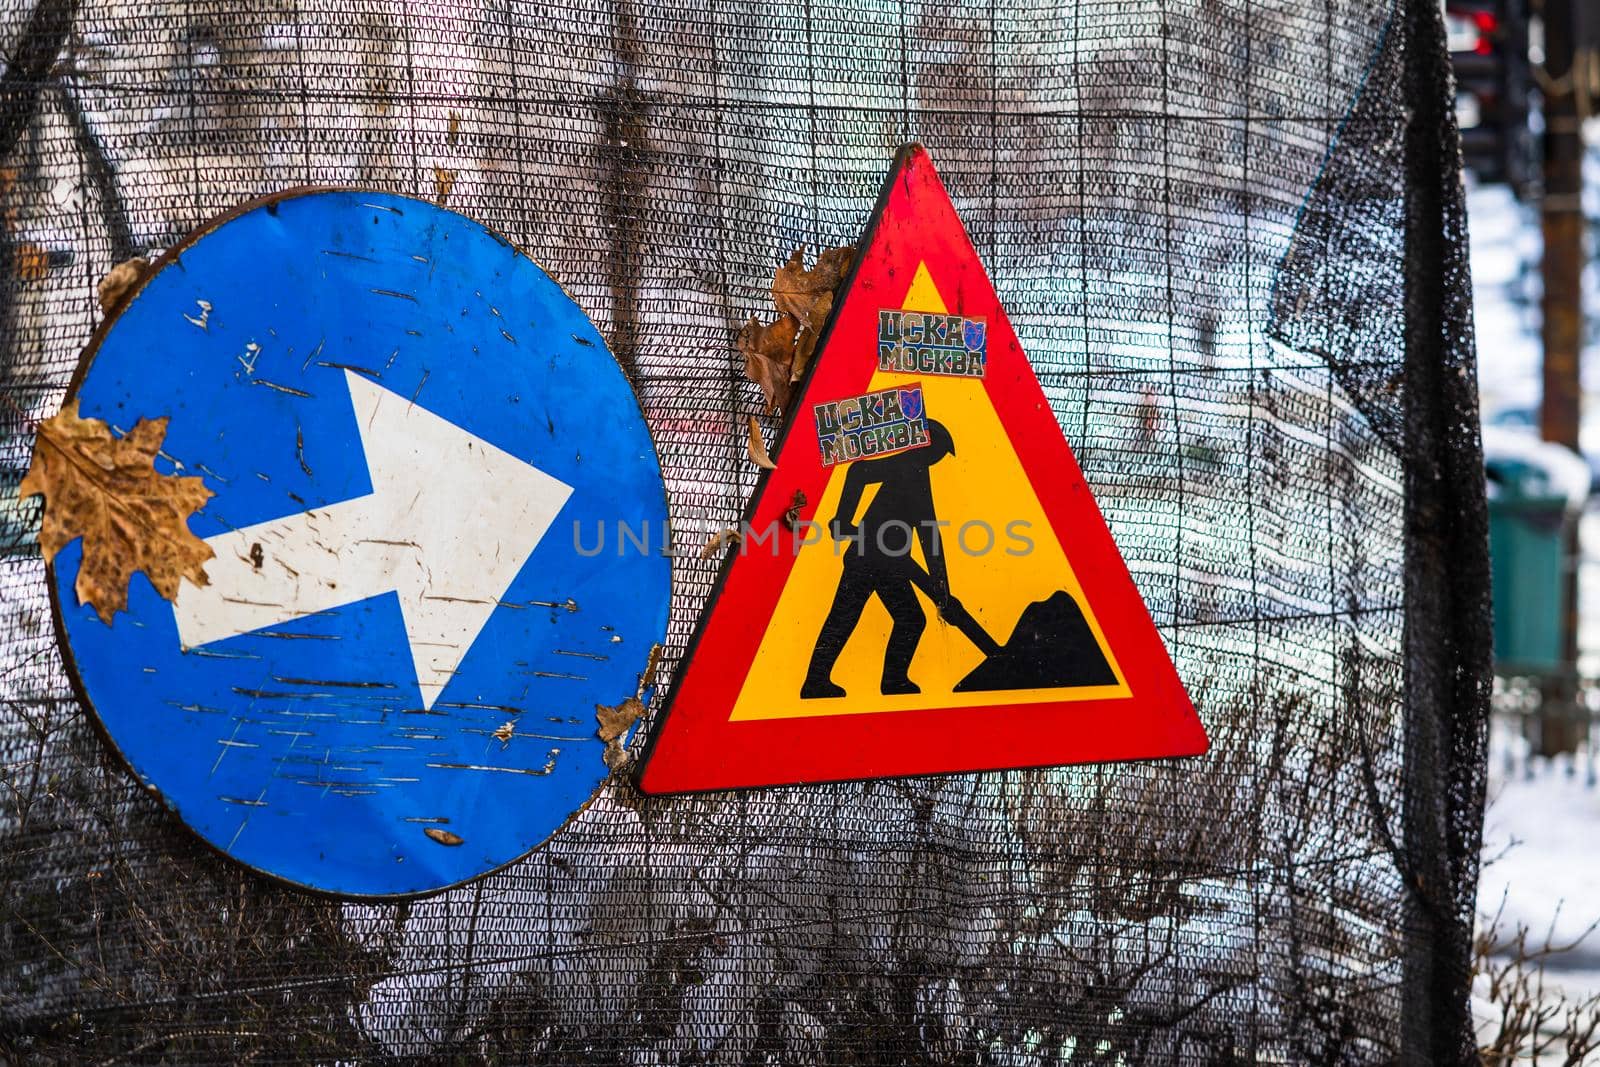 Warning road signs located in working area. Bucharest, Romania, 2021 by vladispas